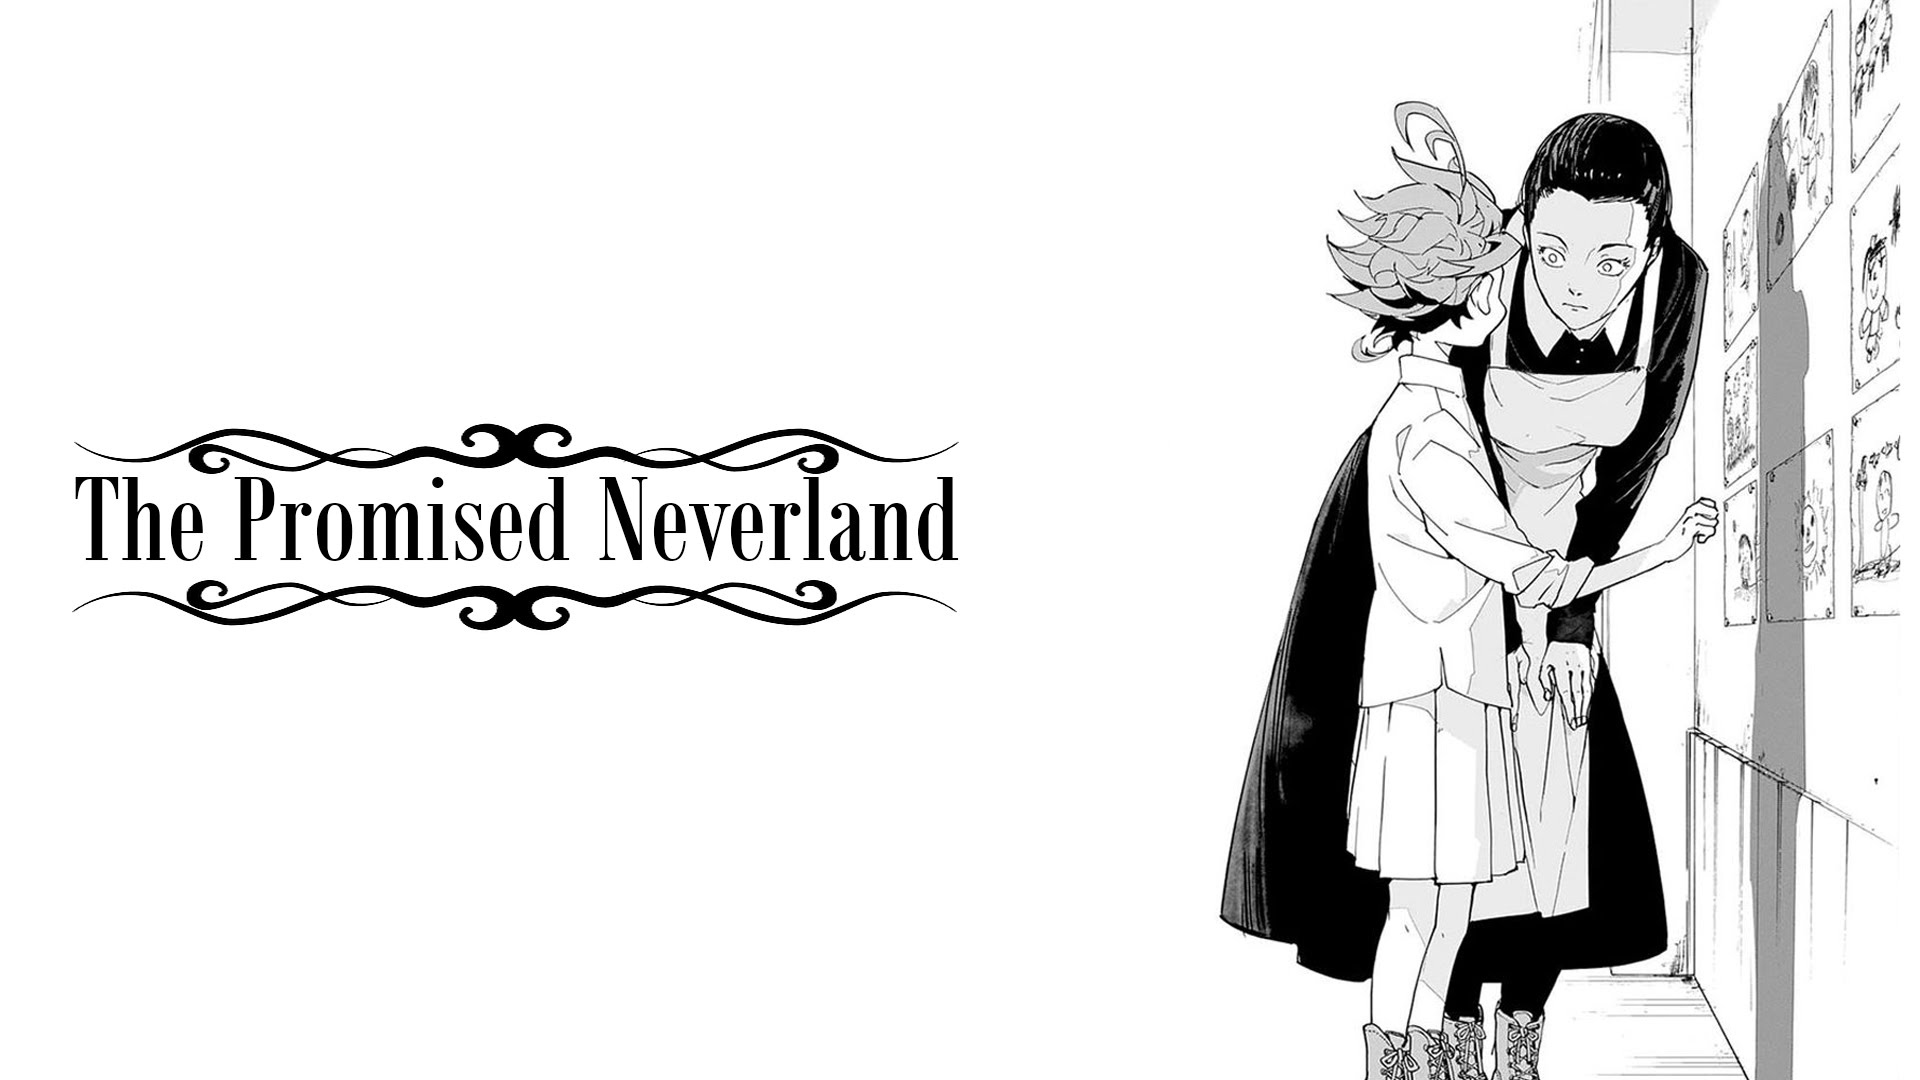 Vertigo Manga's The Promised Neverland To Be Adapted As A TV Series By